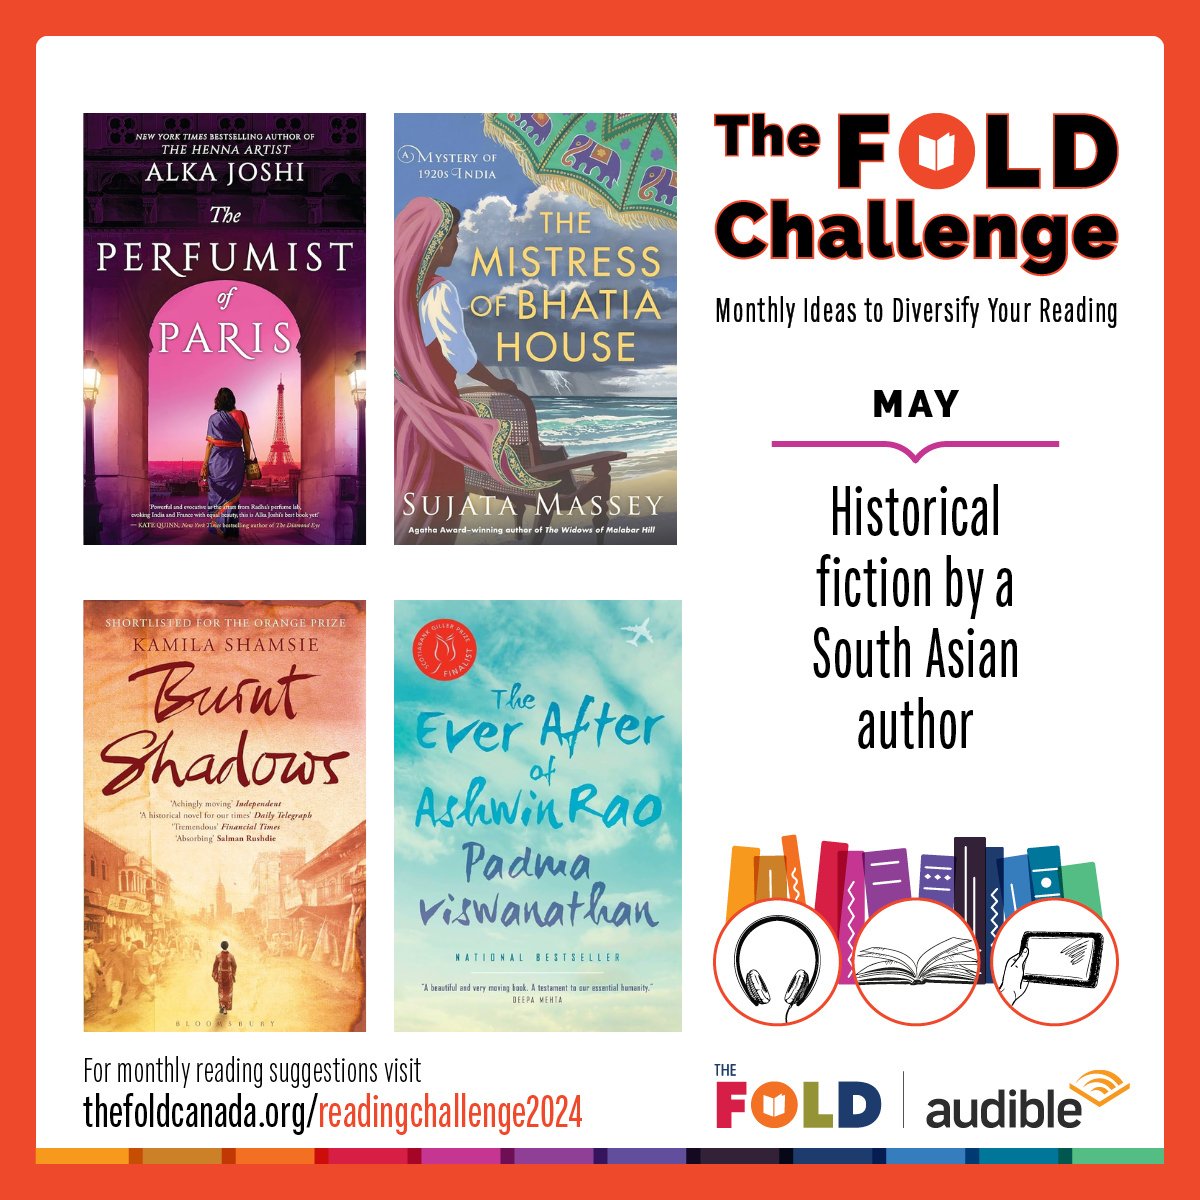 This month, we’re encouraging you to read historical fiction by a South Asian author!

May's challenge feats. titles from @alkajoshi, @sujatamassey, @kamilashamsie, and @padmav. Check out these recs. on the FOLD website today!

The 2024 FOLD Challenge is sponsored by @audible_ca.